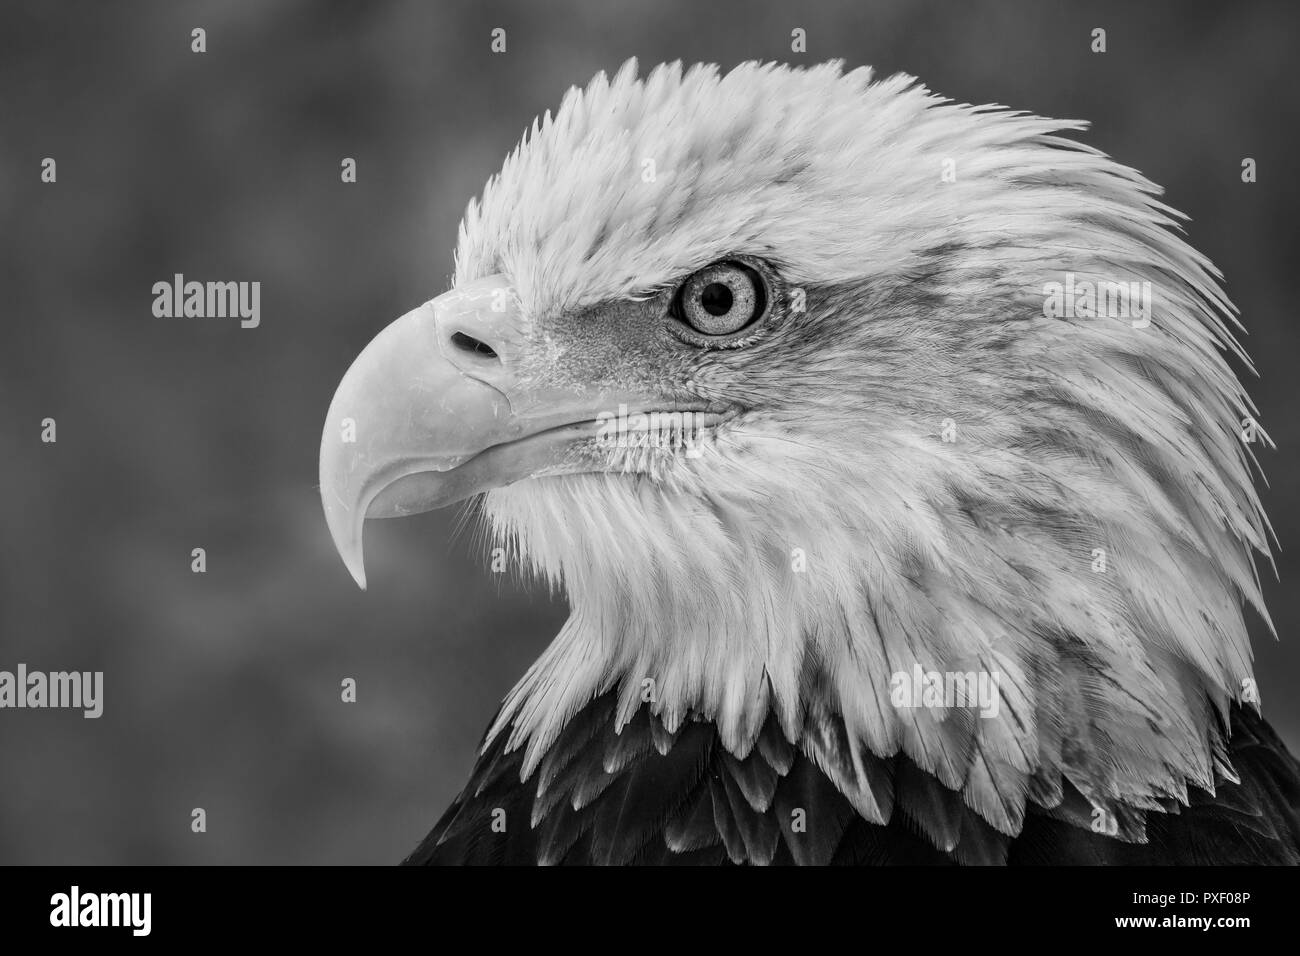 Black and White Profile Portrait of an Juvenile Bald Eagle Against a Mottled Gray Background Stock Photo